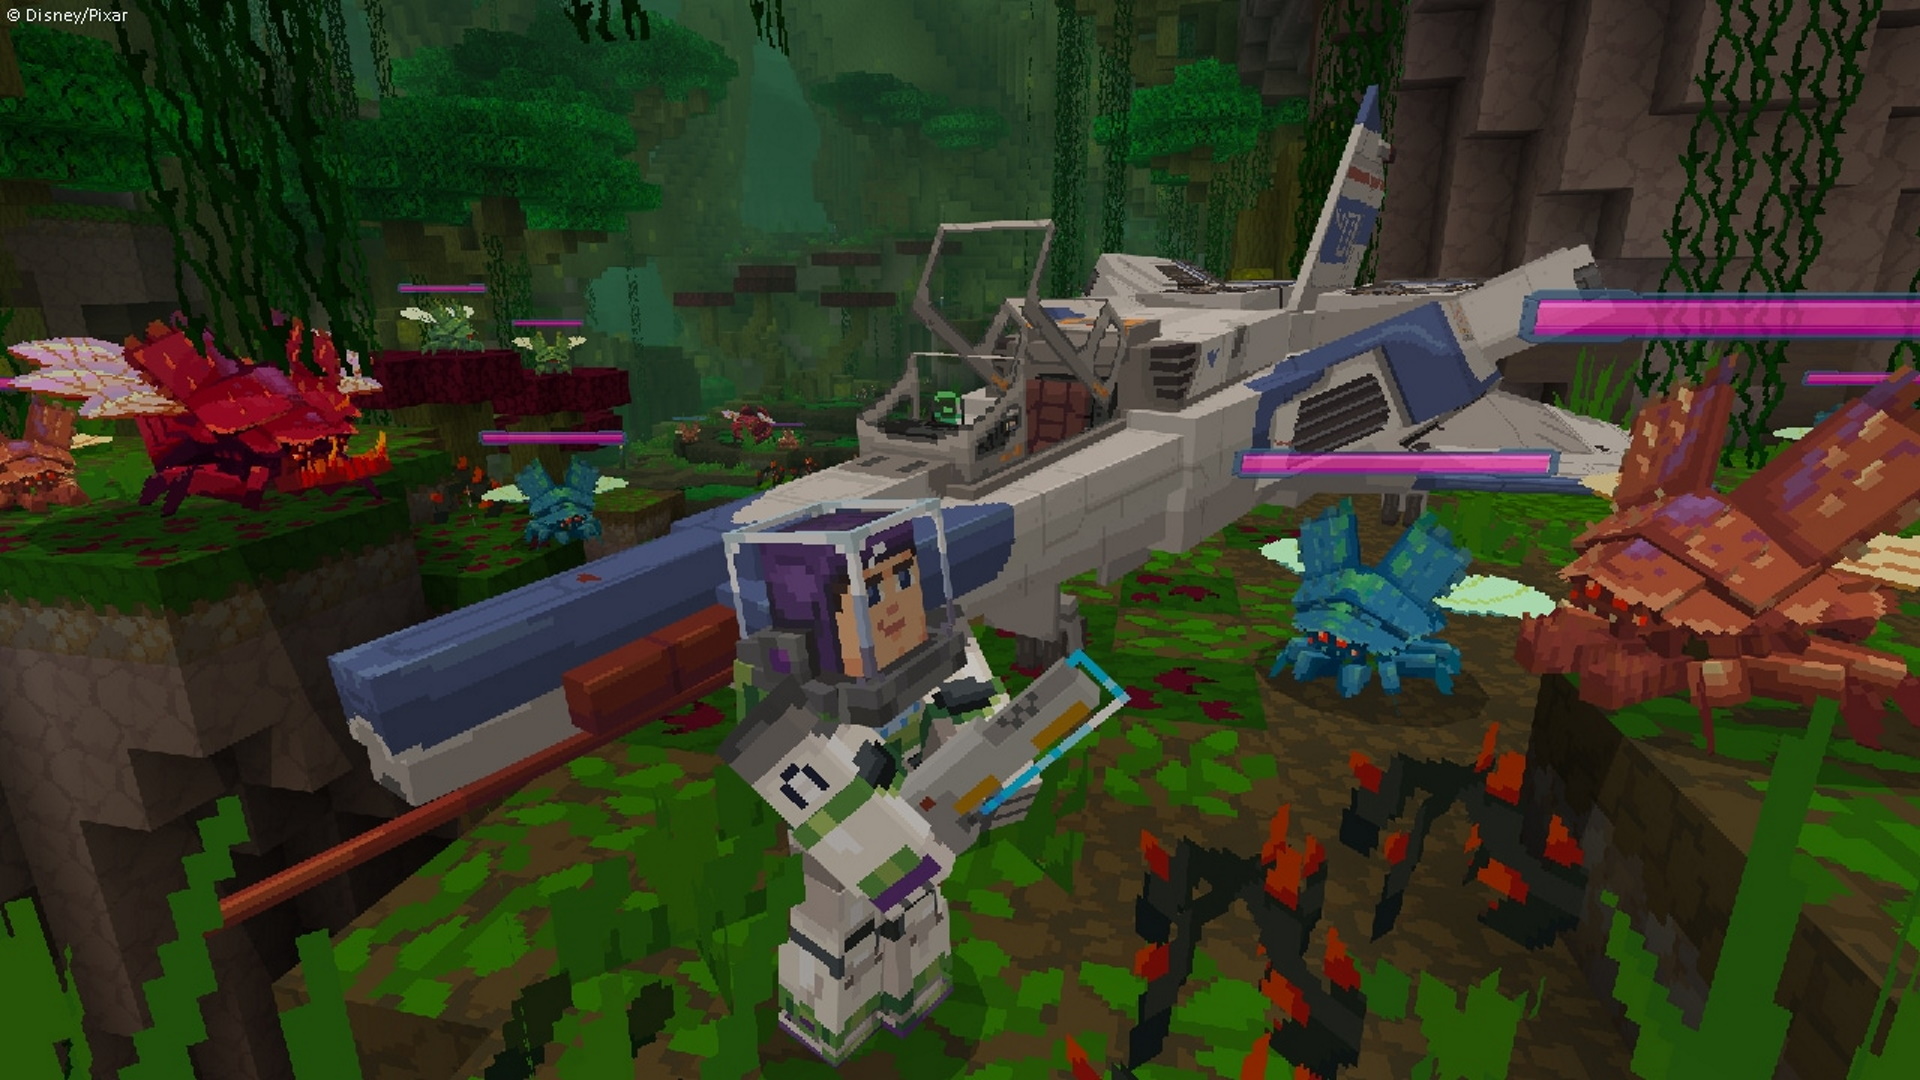 New Minecraft DLC wants you to crash land your ship by mistake